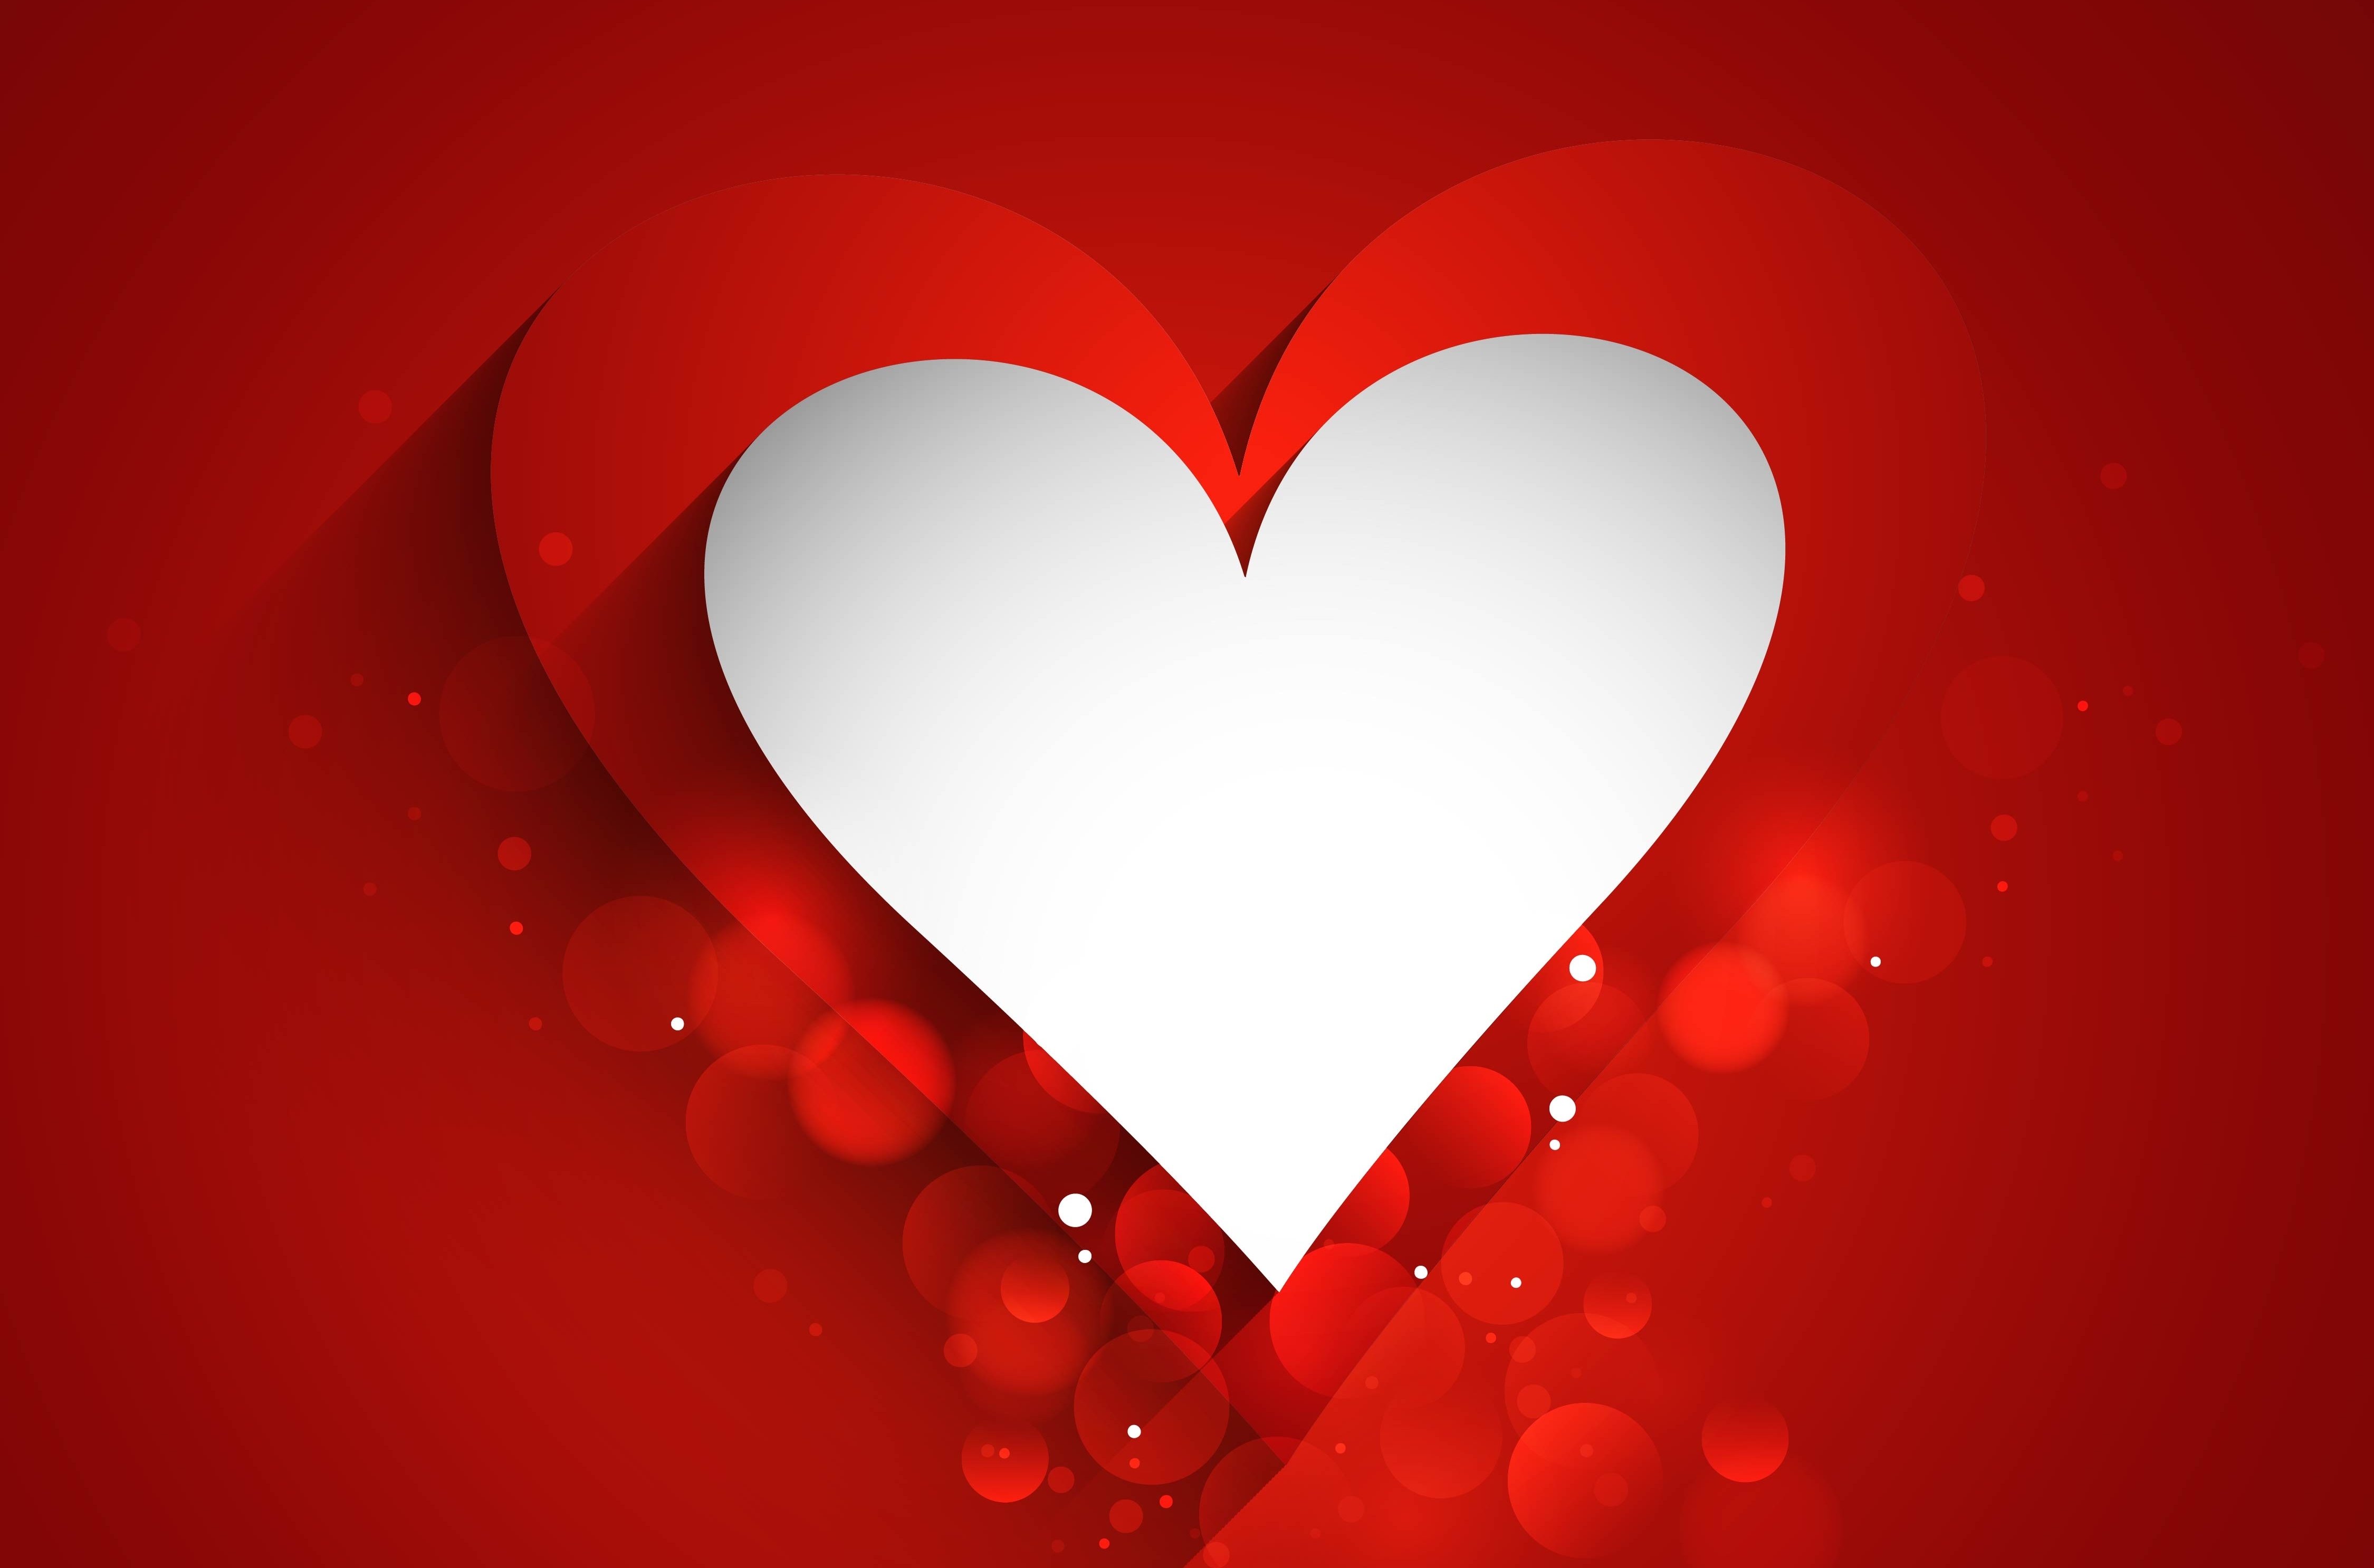 Heart Images Cool Backgrounds 17167 - HD Wallpapers Site